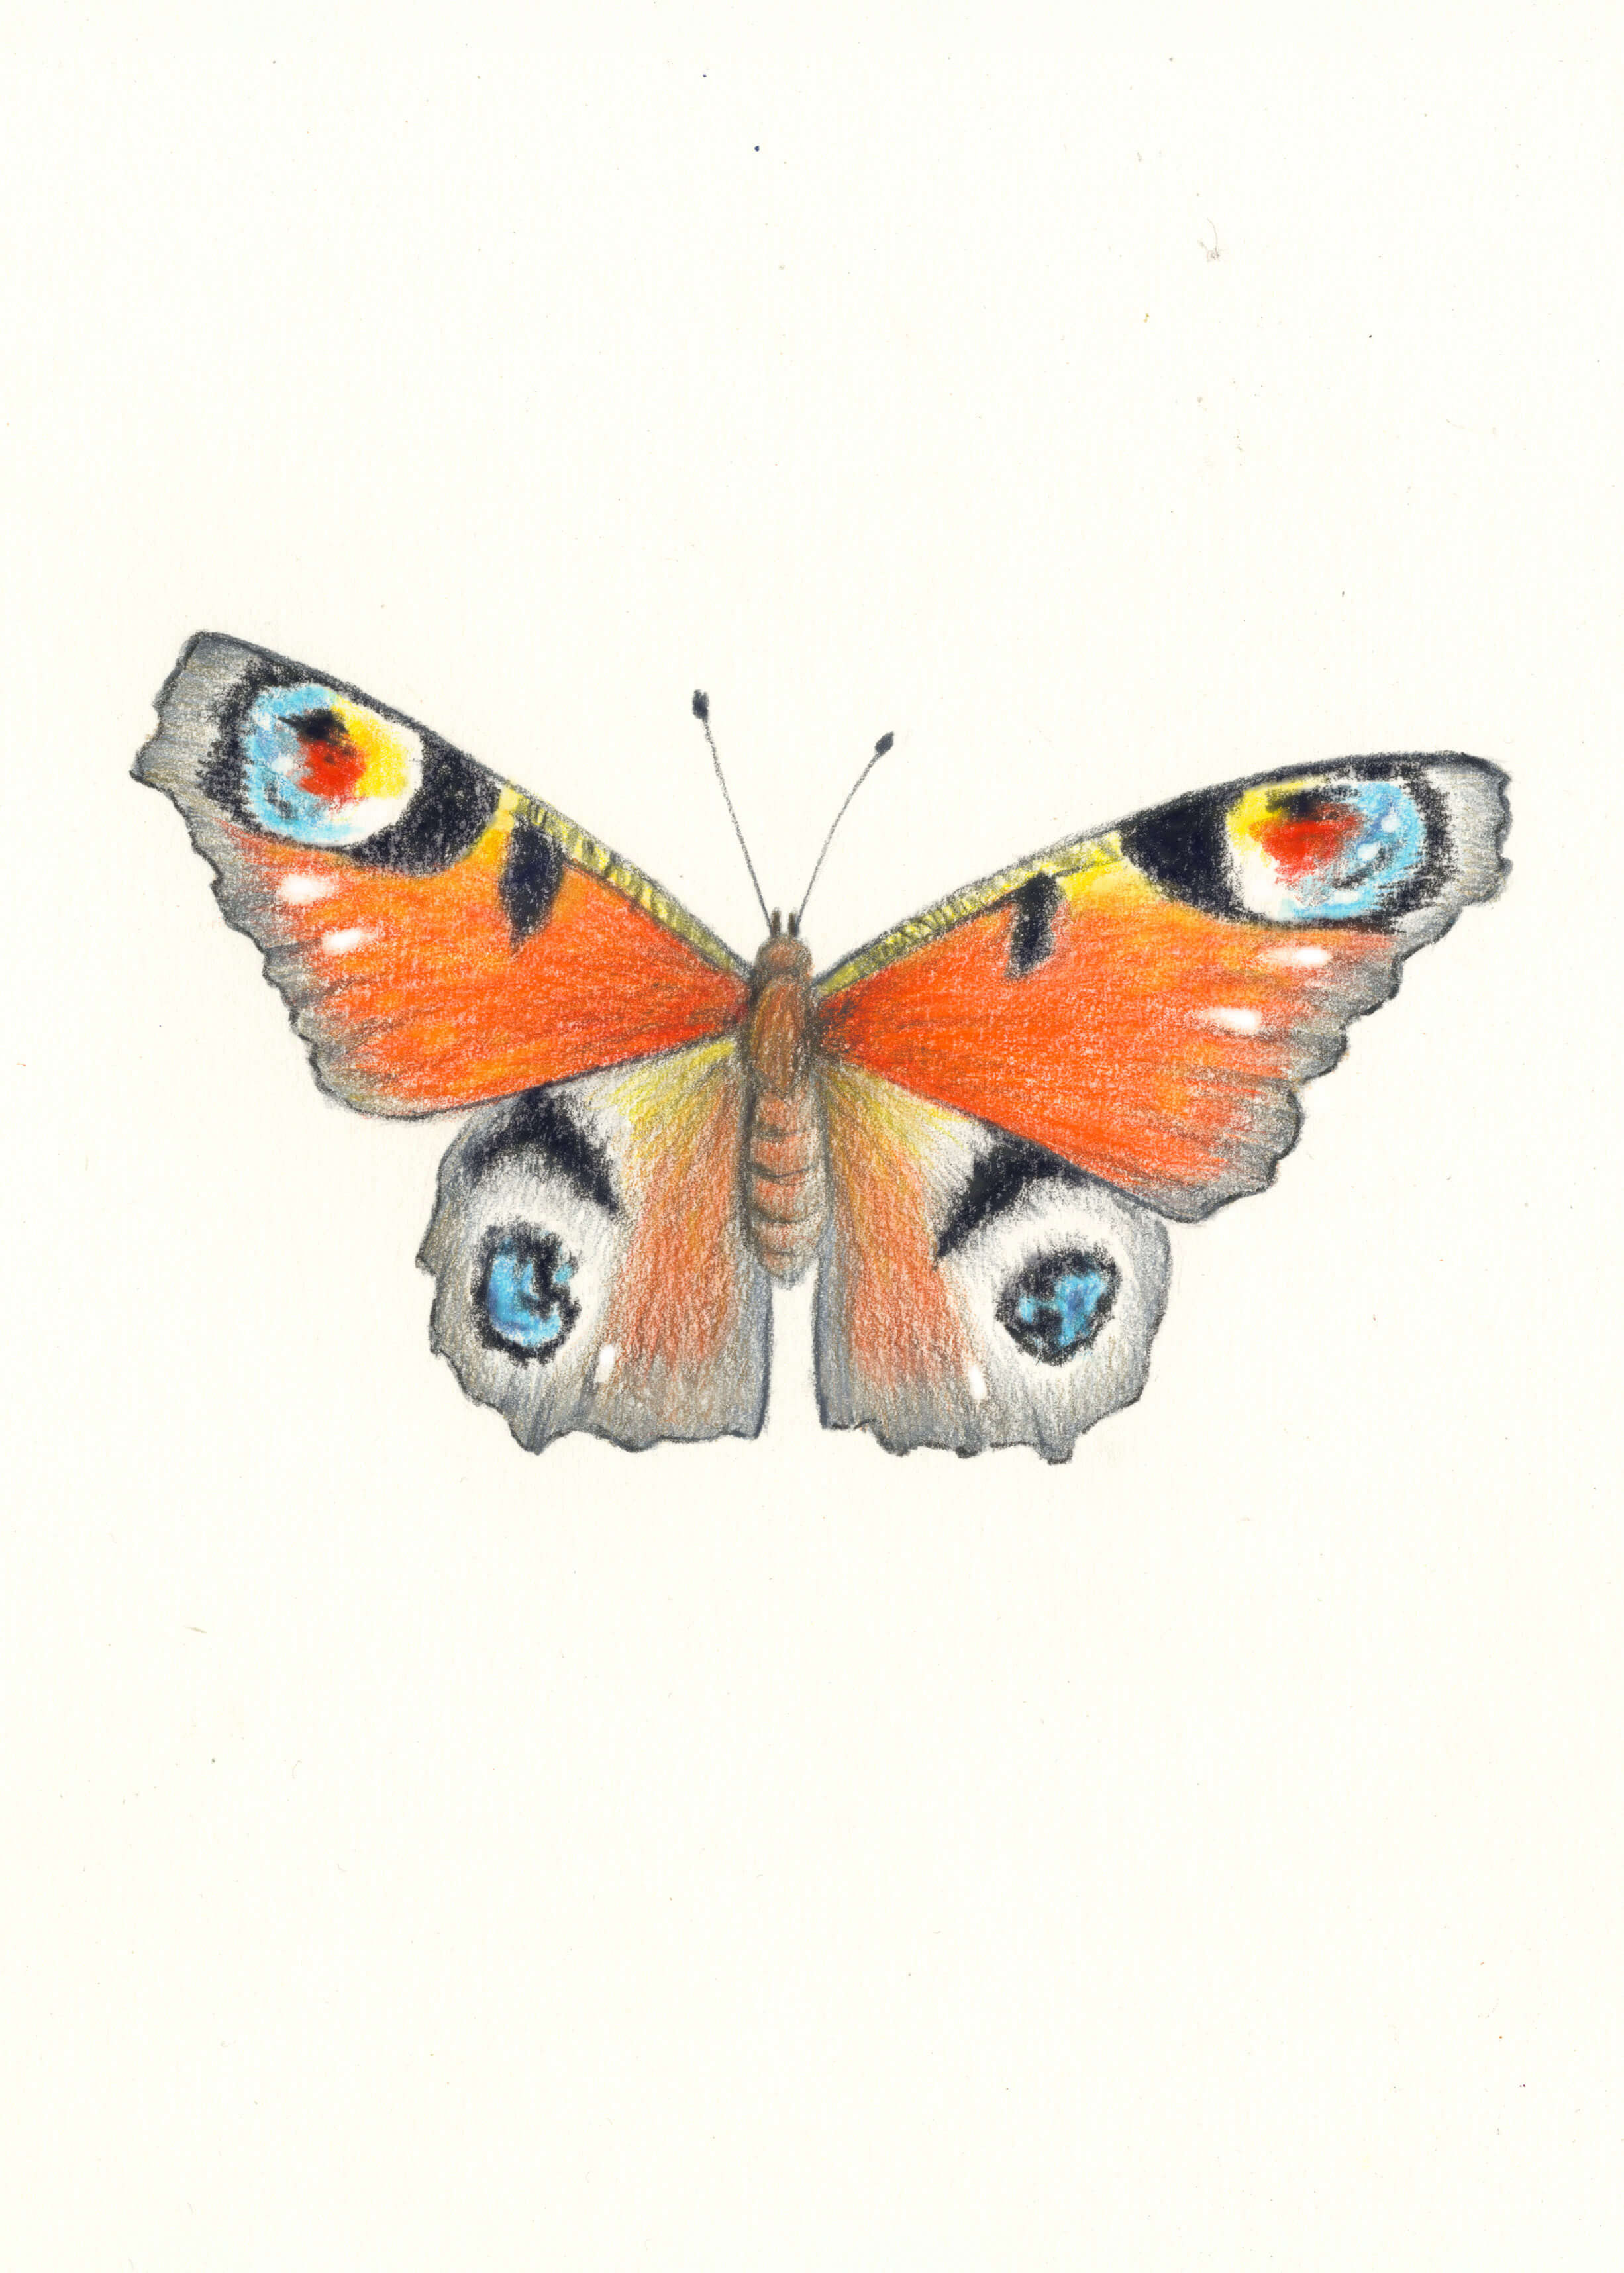 Finished butterfly drawing